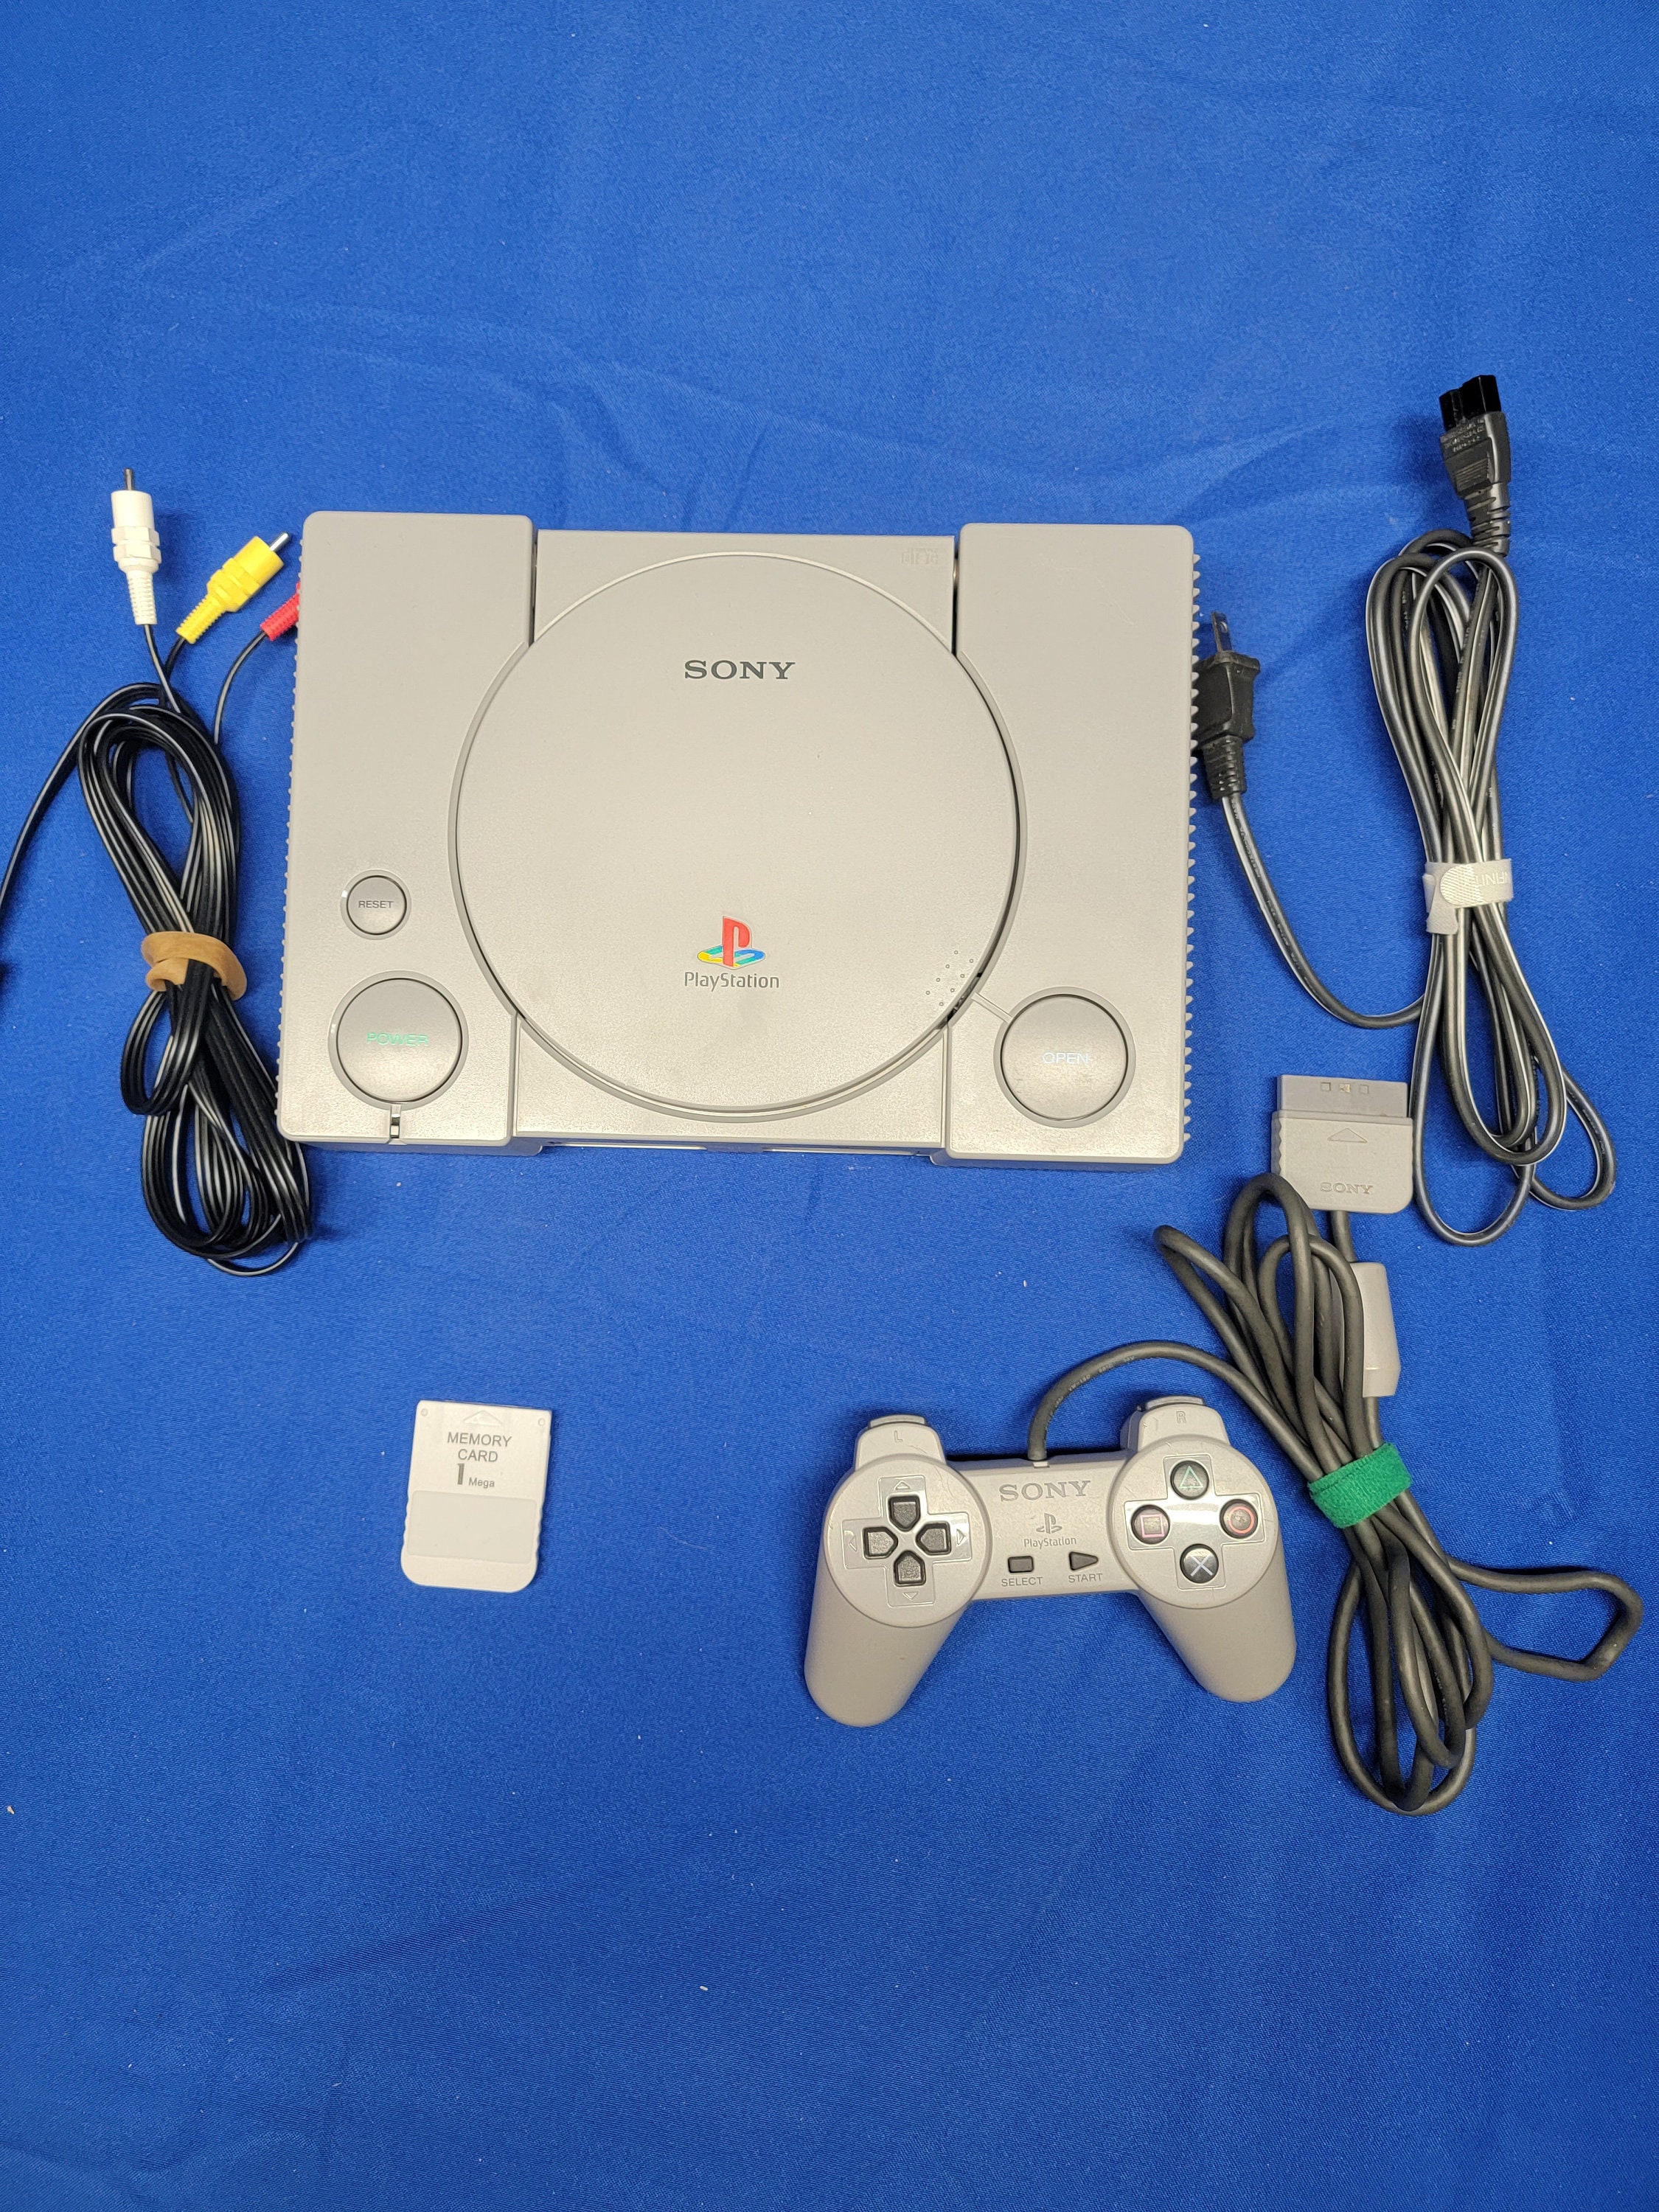 PS2 SUPER LOT 2 PS2 Systems, 4 Controllers, 5 Memory Cards, 2x Power  Cords/av Cables, 16 Games 13 PS2, 3 PS1, & Swap Magic Version 3.6 